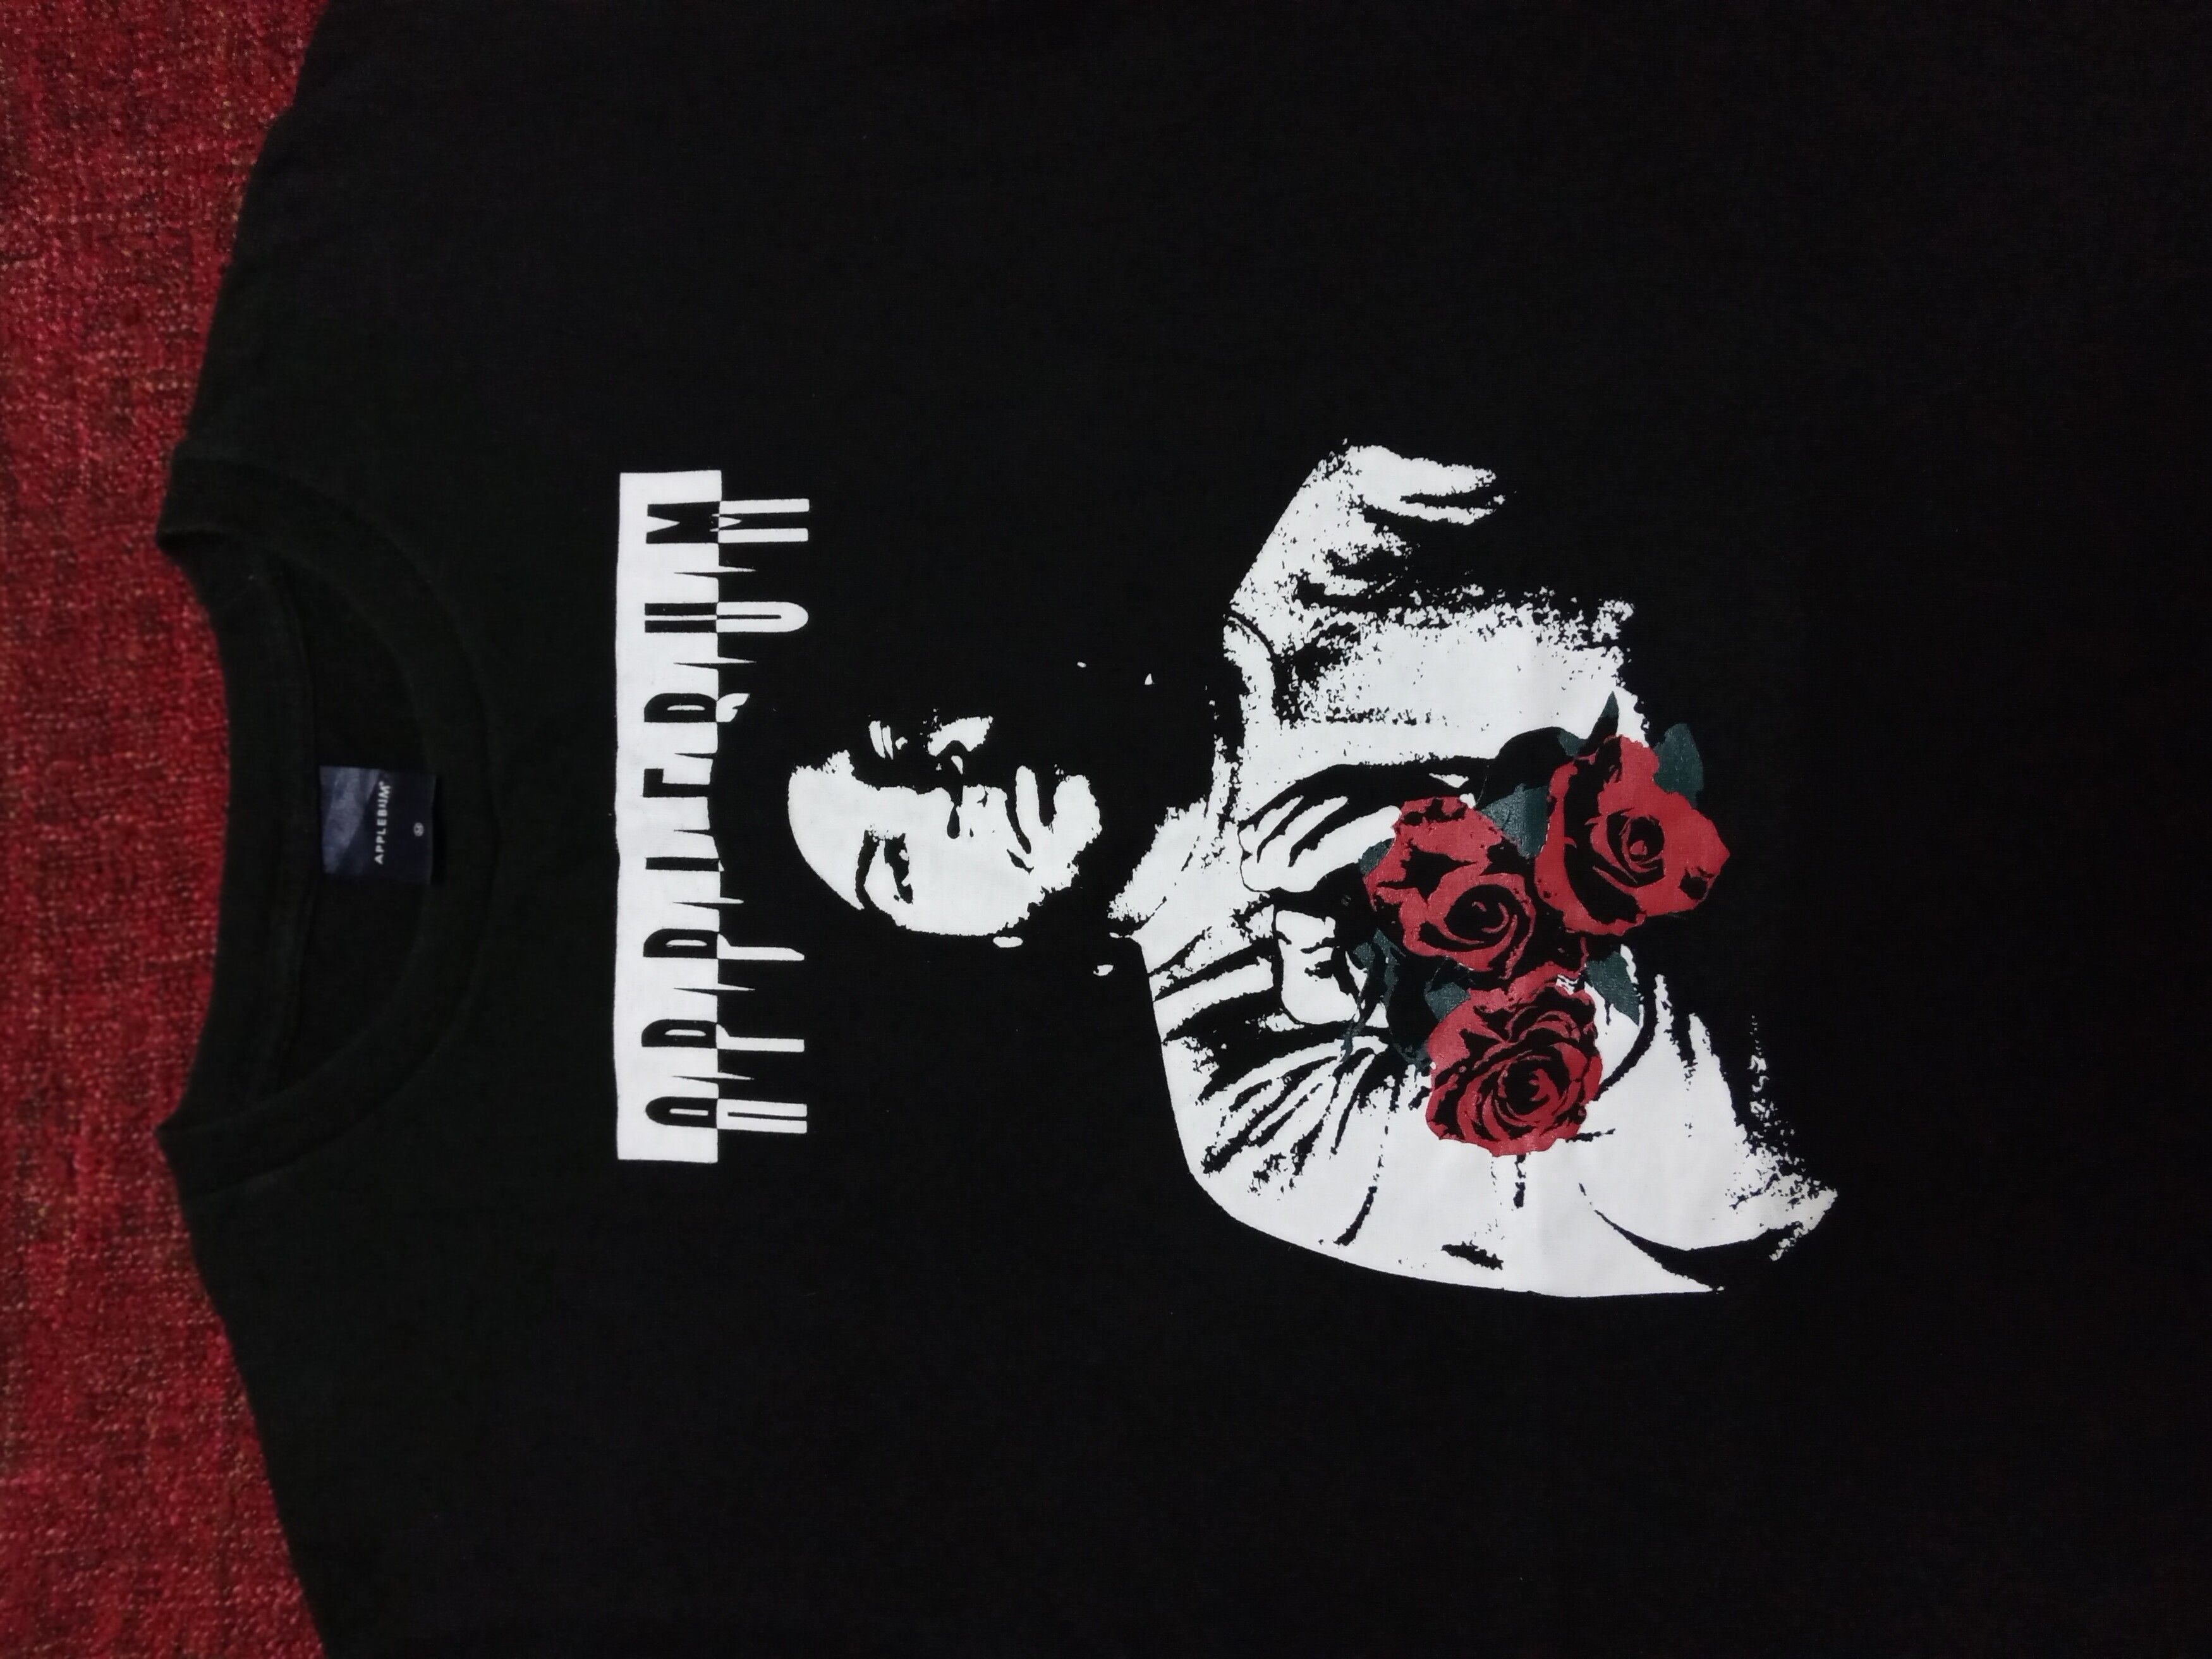 Japanese Brand Rare Applebum Japanese streetwear tribute to Ice cube Tee Size US M / EU 48-50 / 2 - 1 Preview